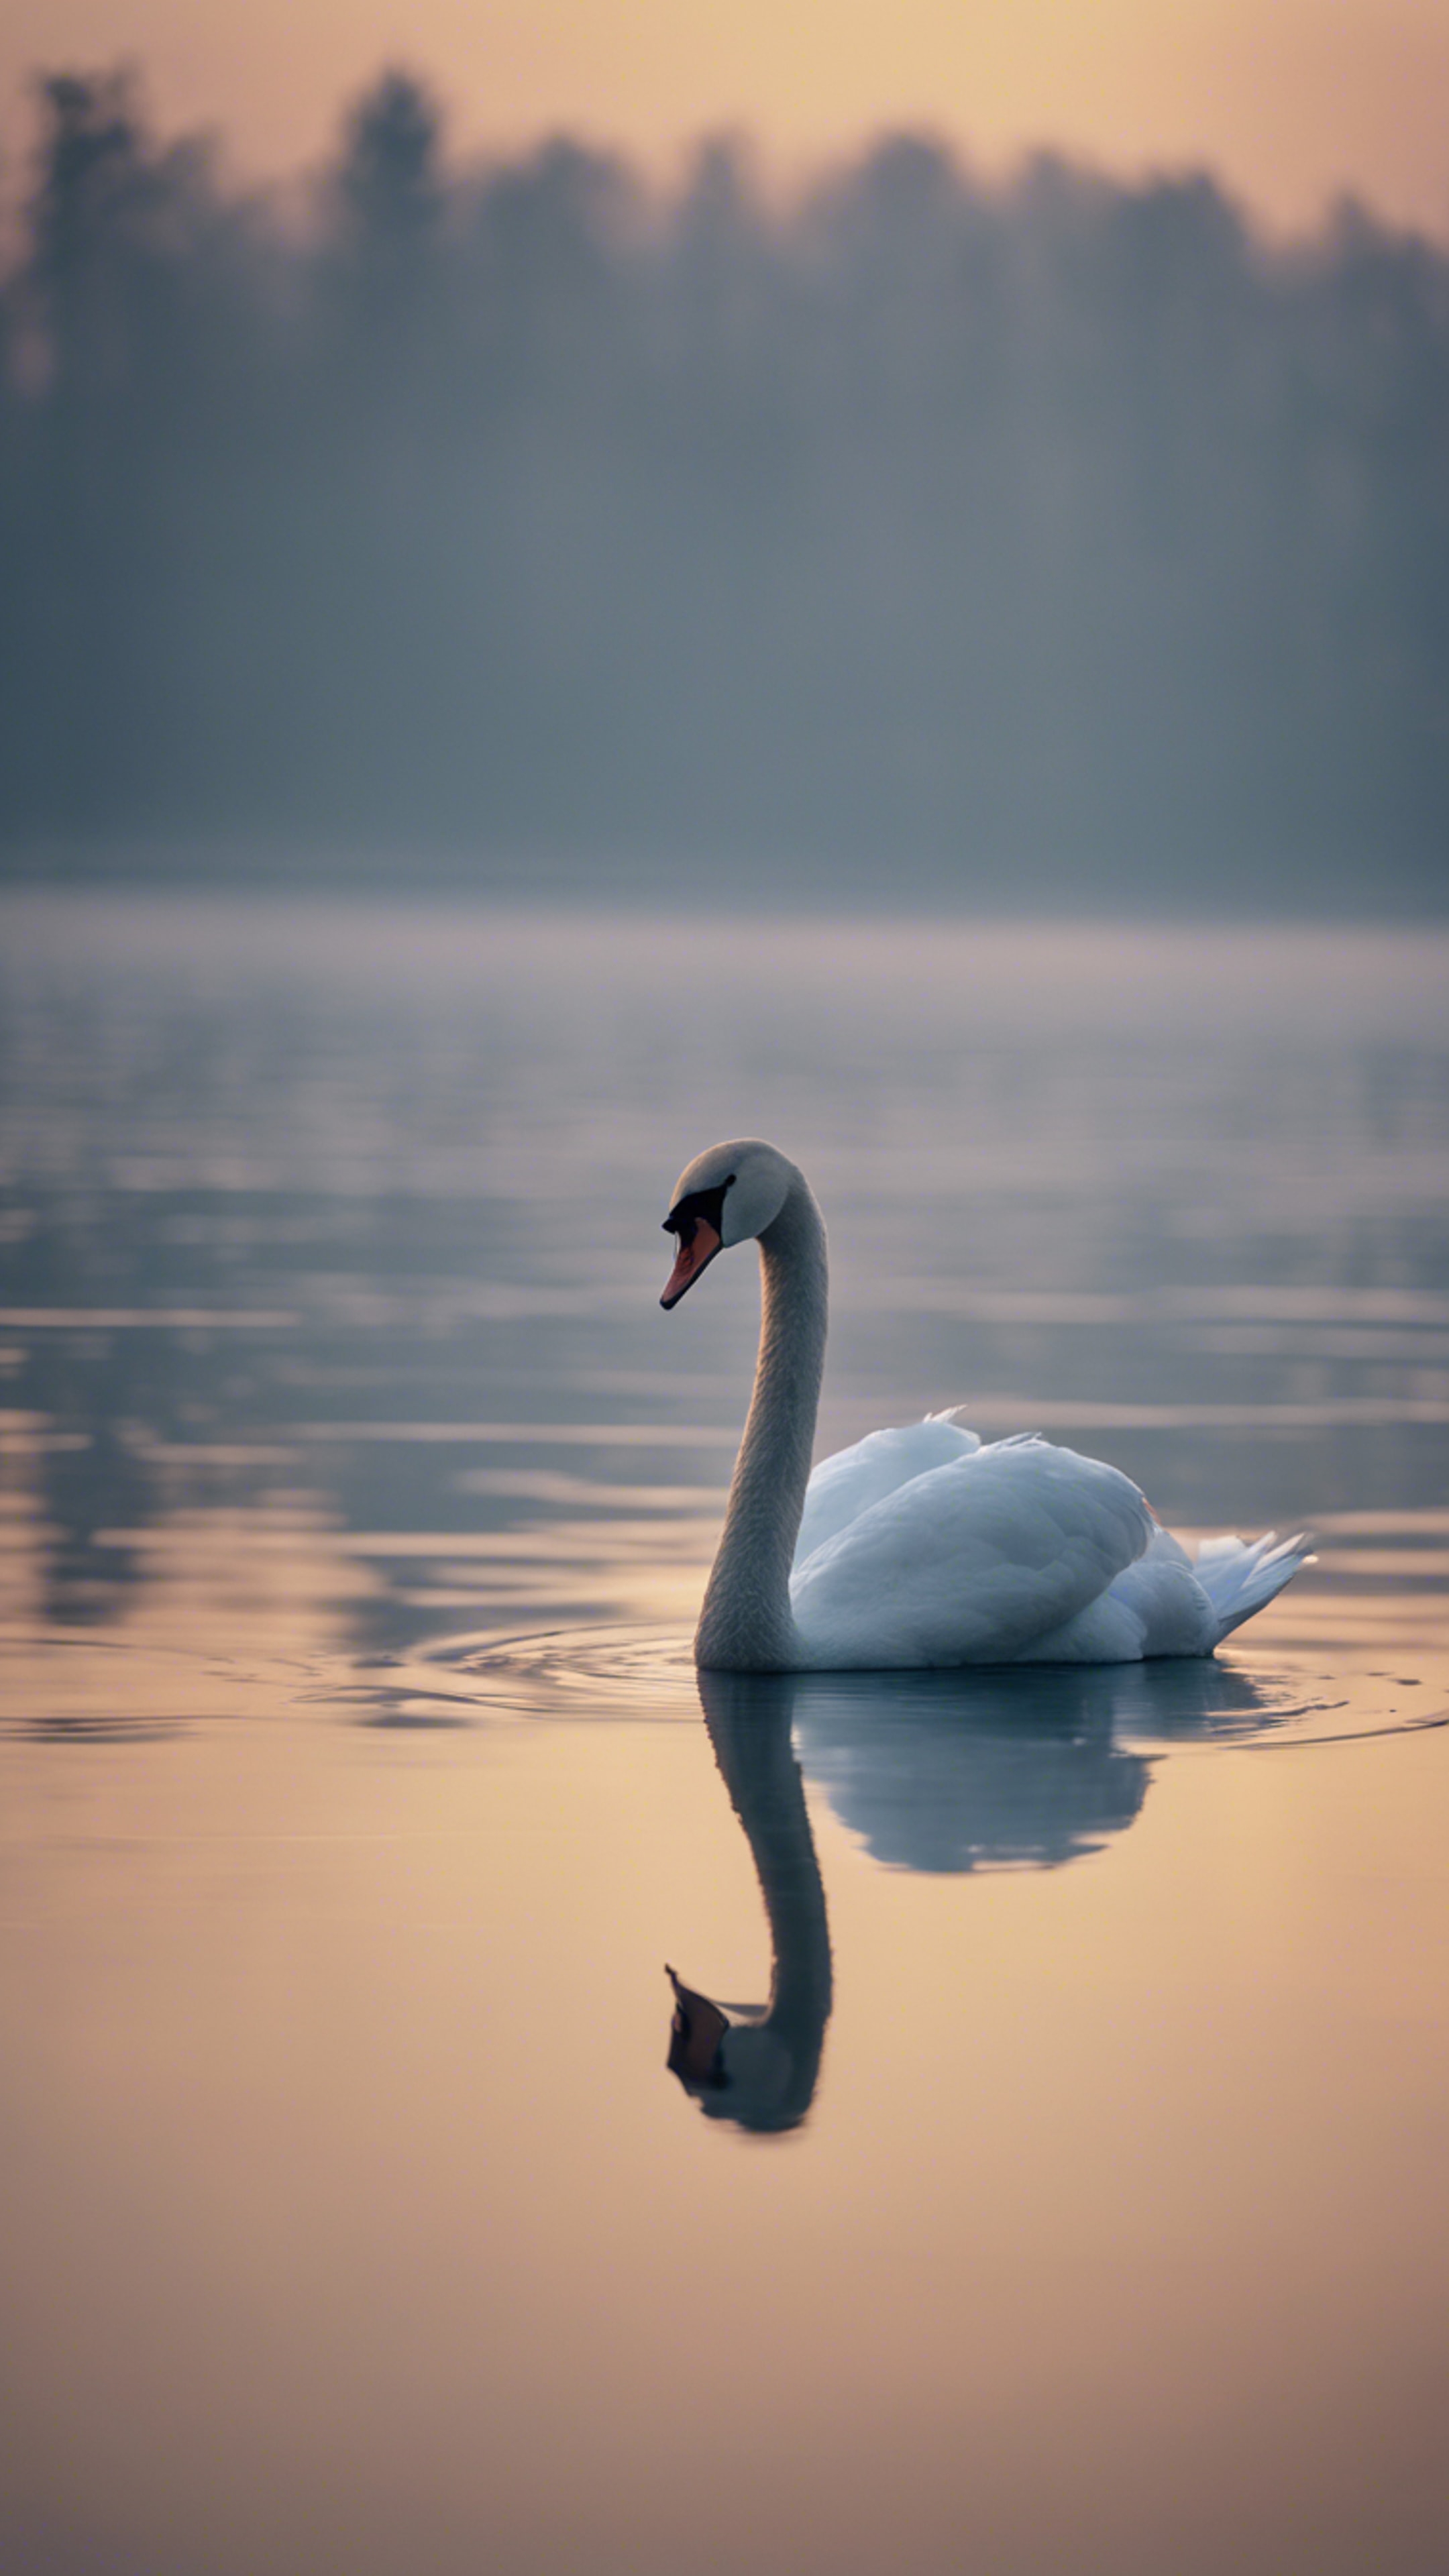 A single love-struck swan swimming alone in a desolate lake under the pallid glow of a gloomy moon. Tapetai[674930fc7c9f467a8426]